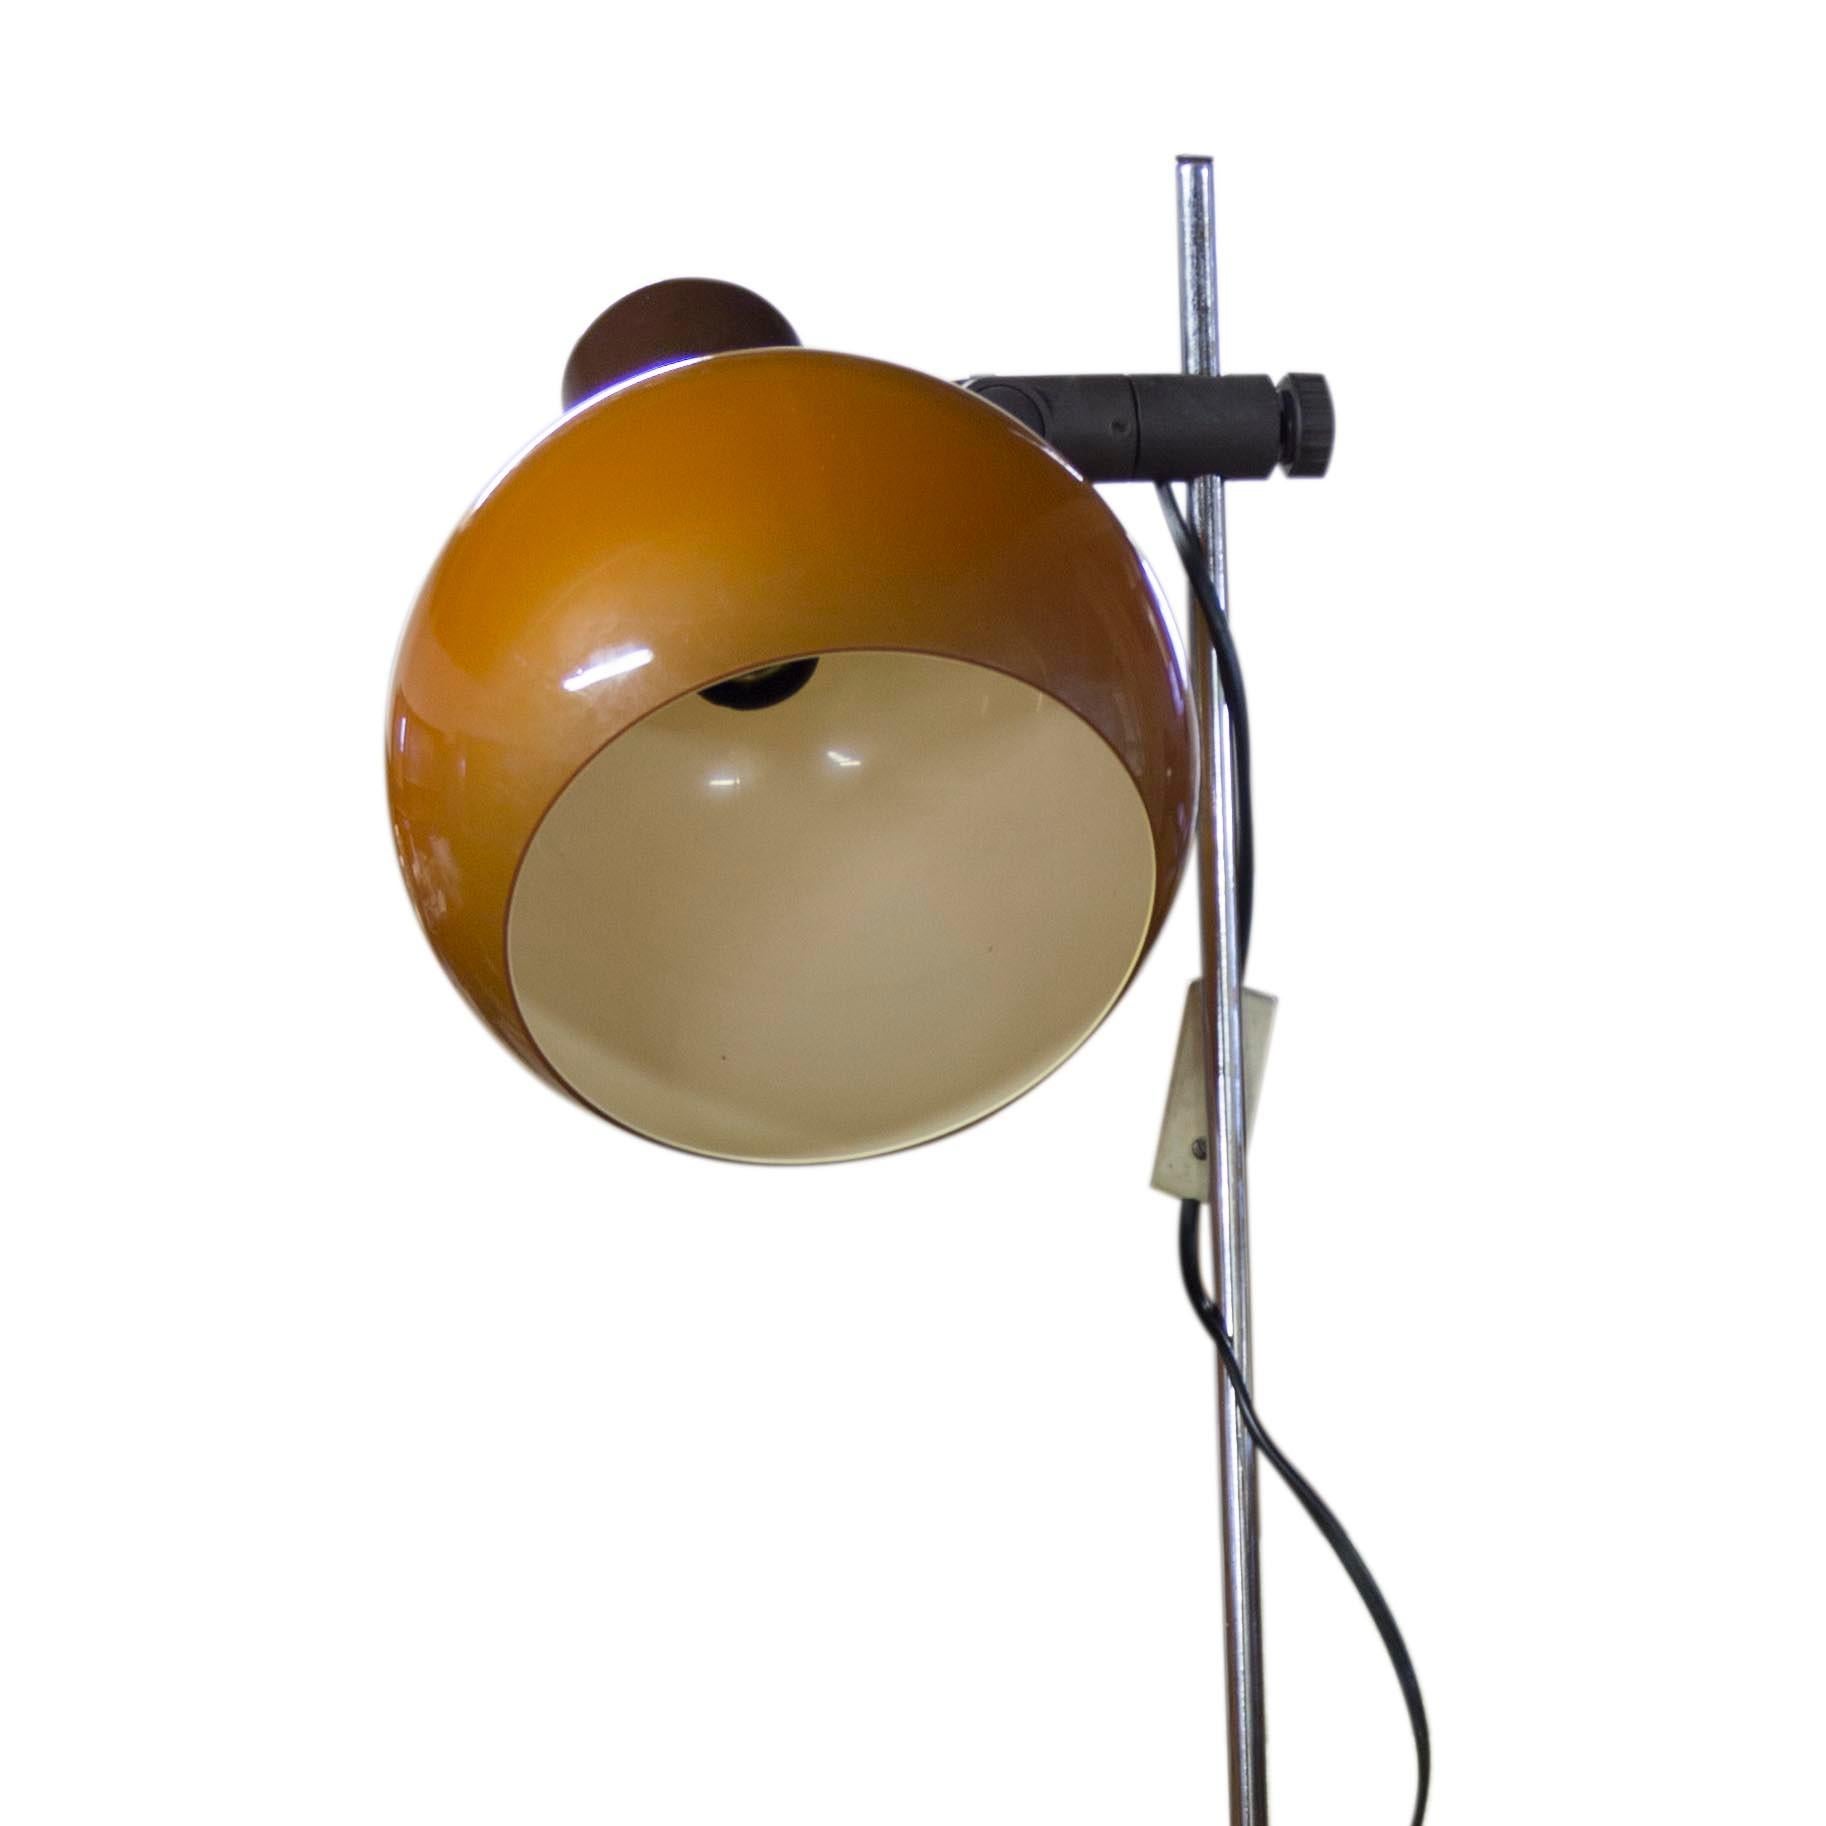 Vintage floor lamp, 1980s, Czechoslovakia. Chrome-plated construction, lampshades adjustable to the sides and up and down. A plastic lampshades.

 